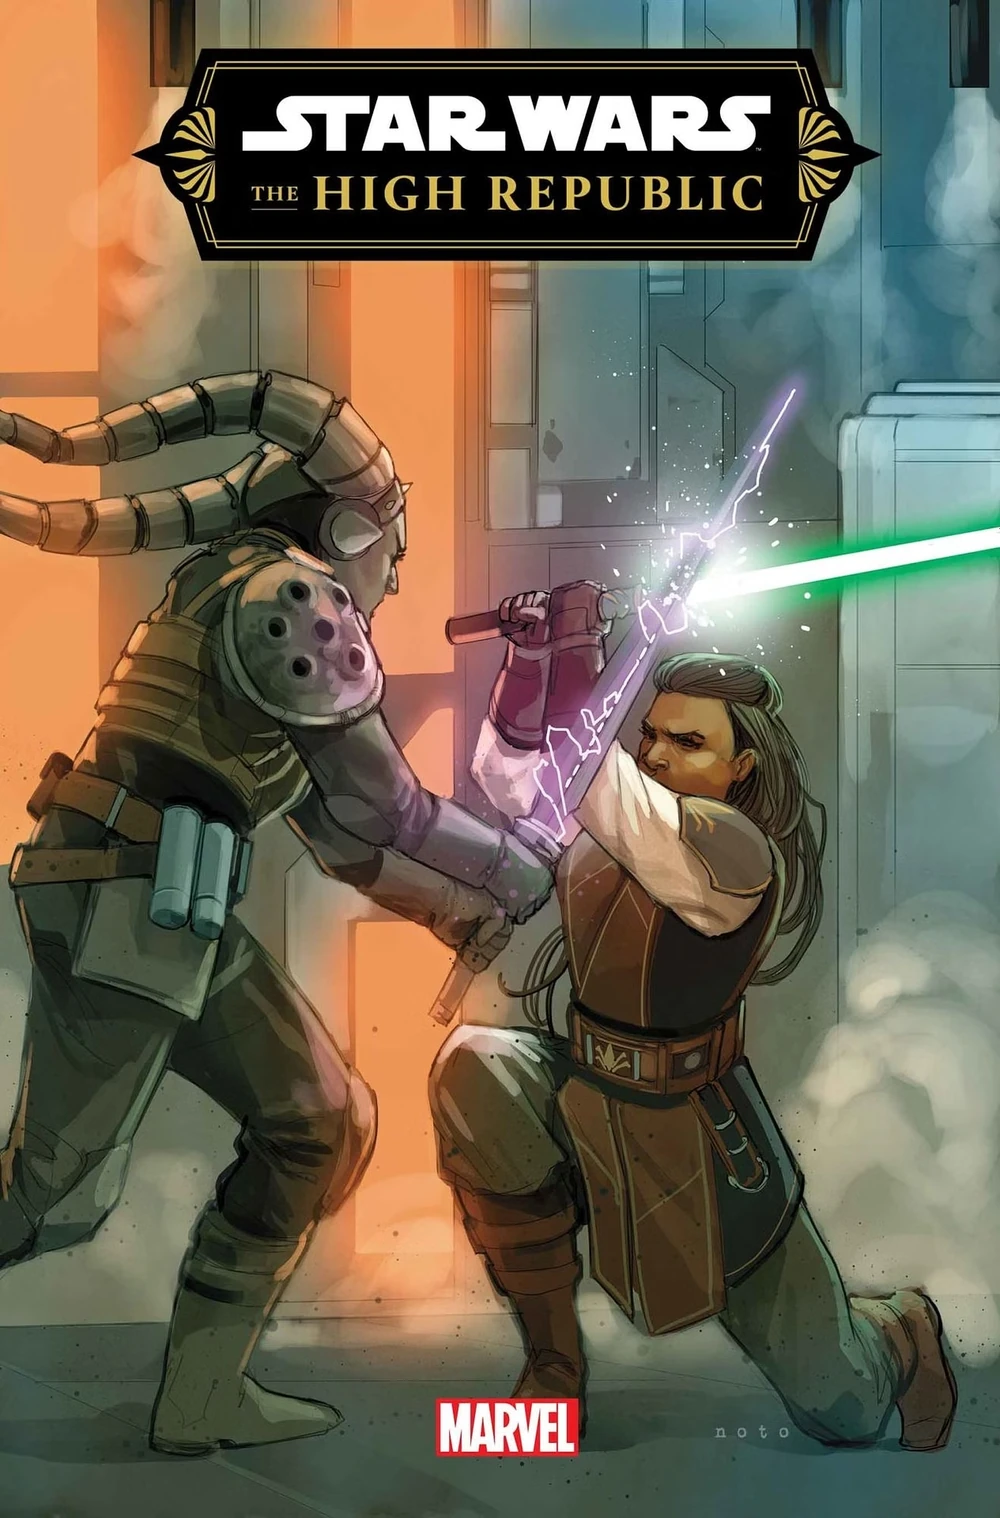 Star Wars: The High Republic #3, Lourna Dee makes her move